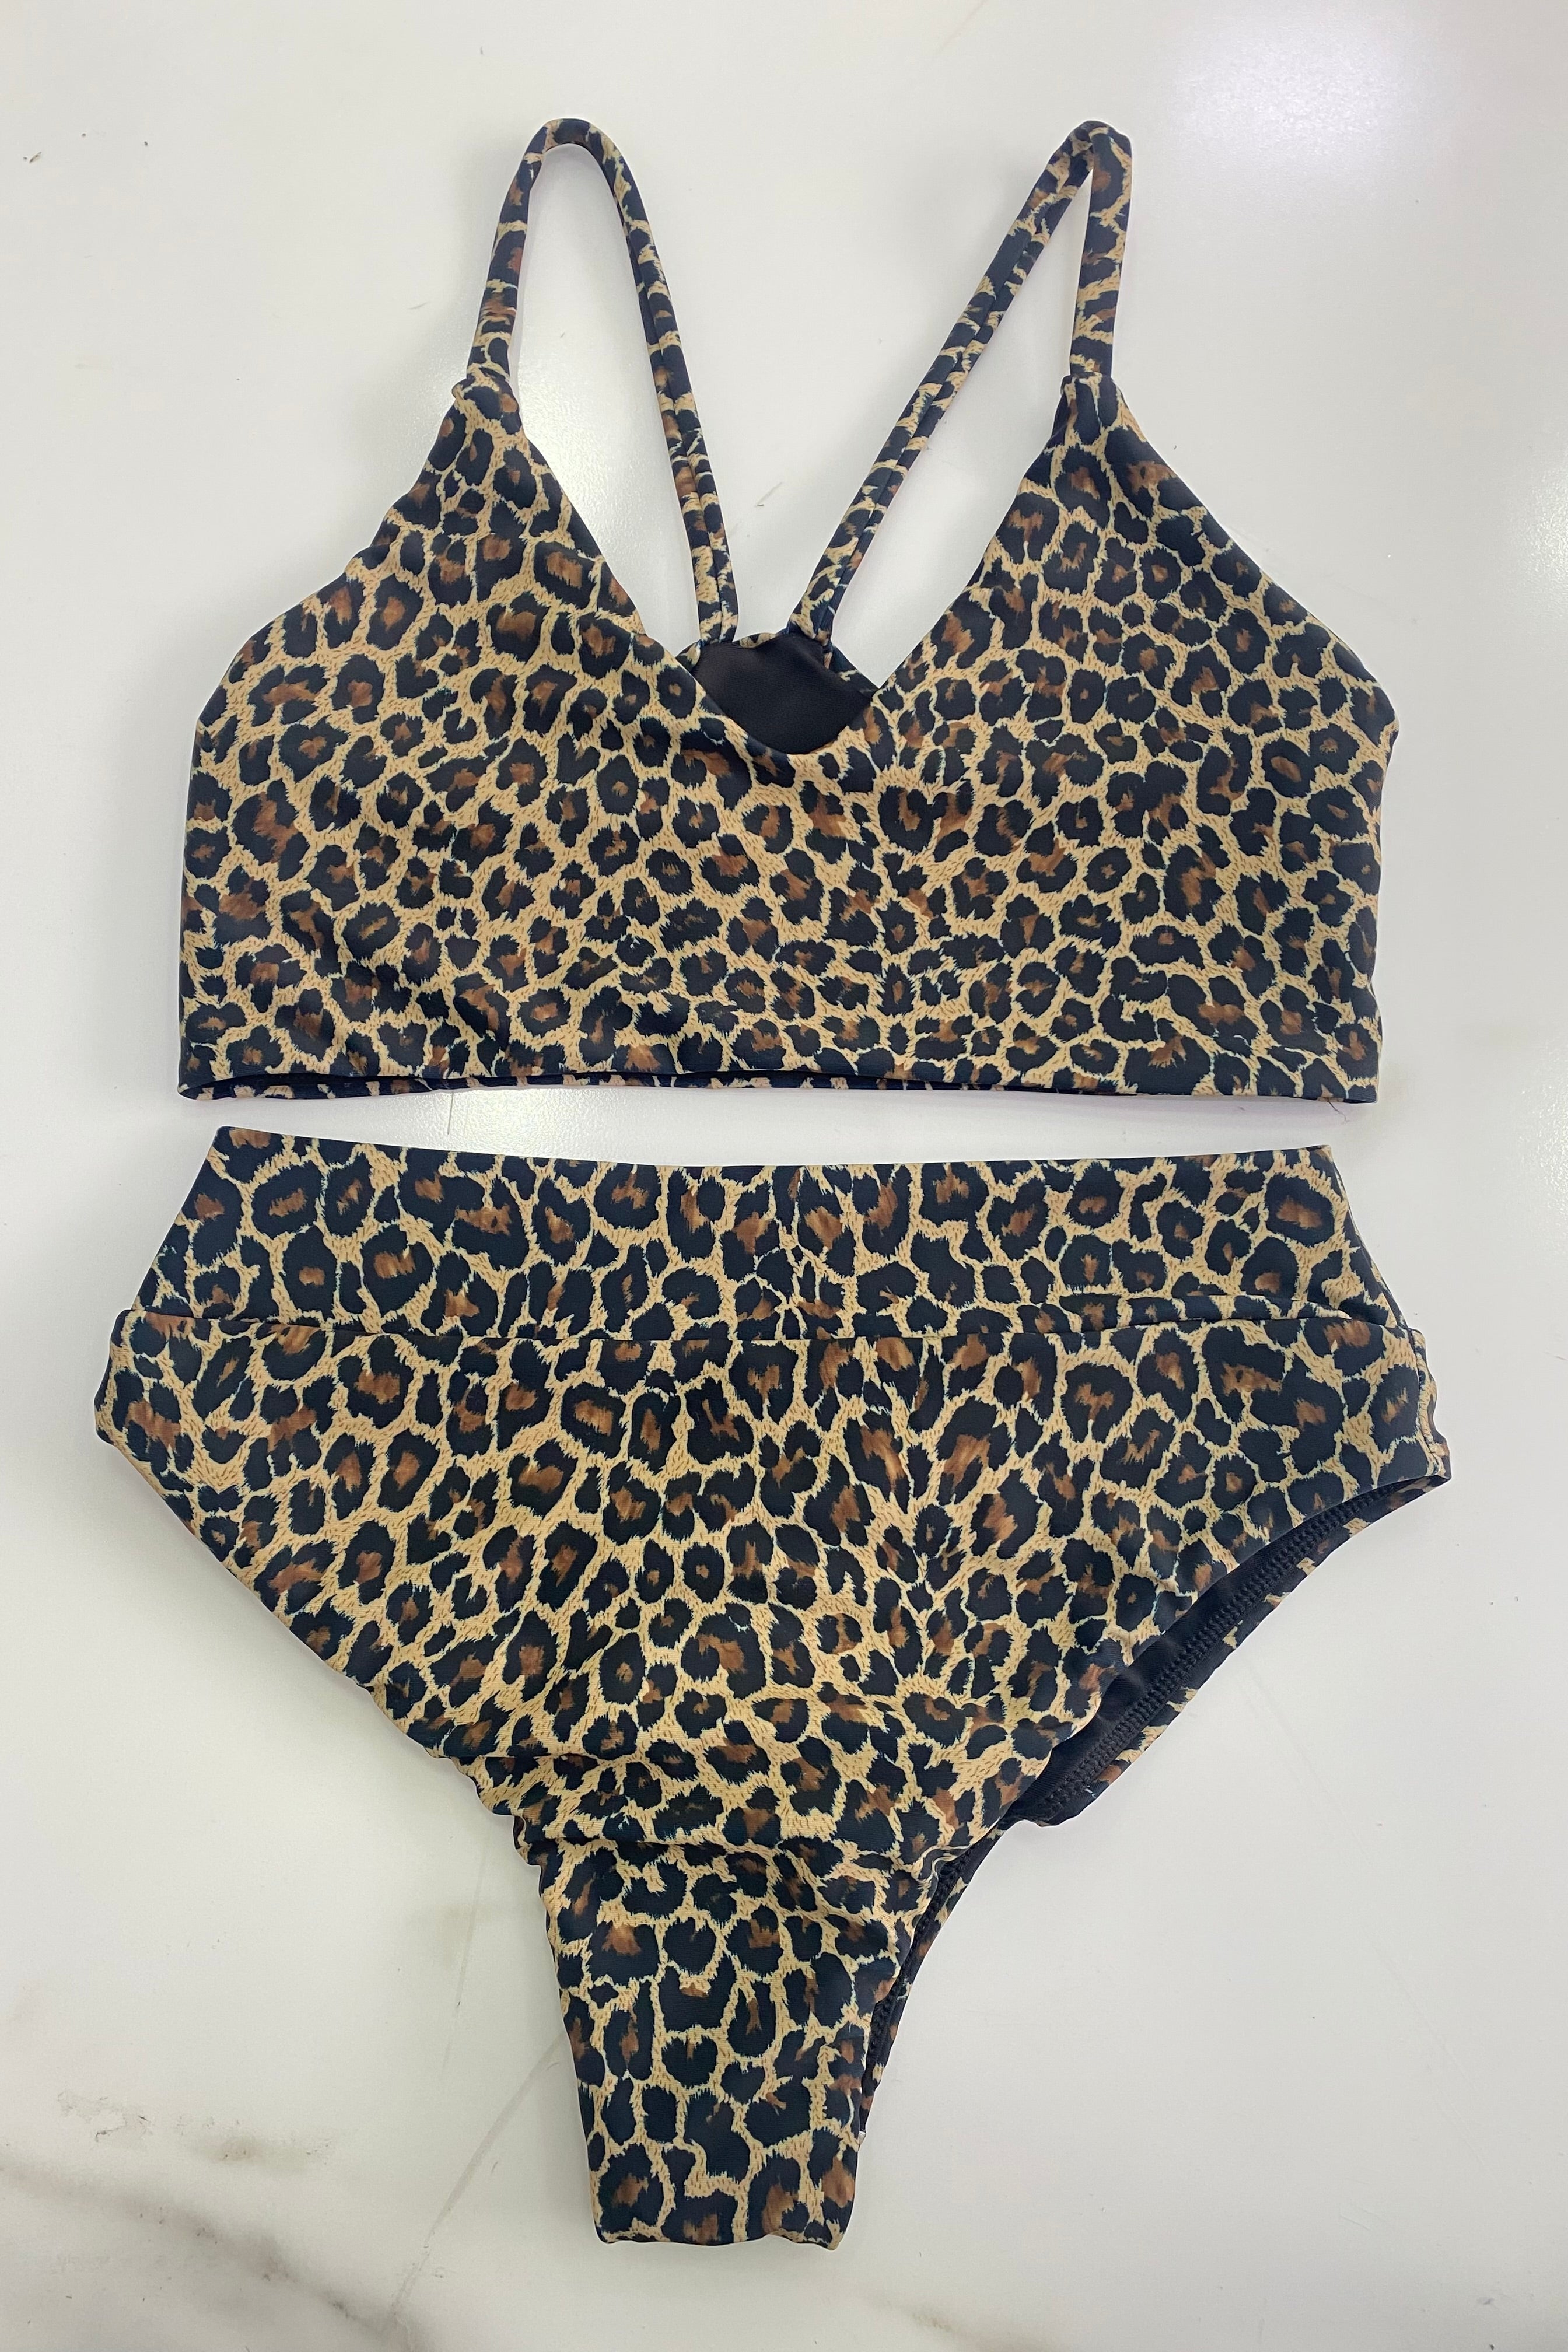 Leopard Top Edgy